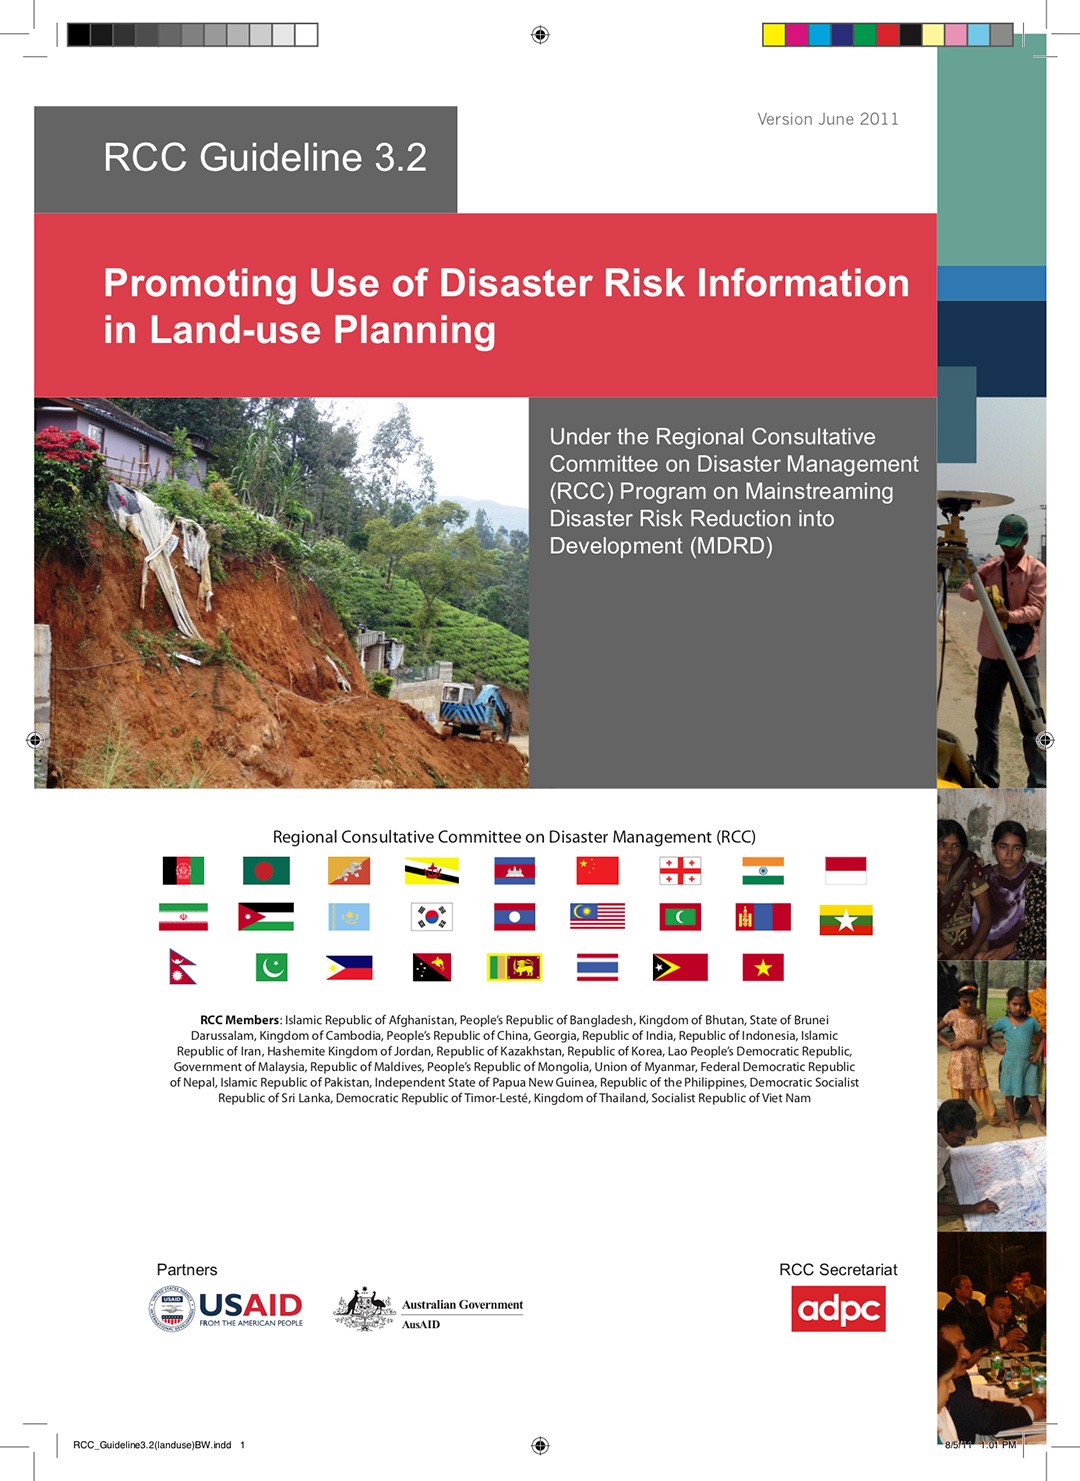 RCC Guideline: Promoting Use of Disaster Risk Information in Land-use Planning